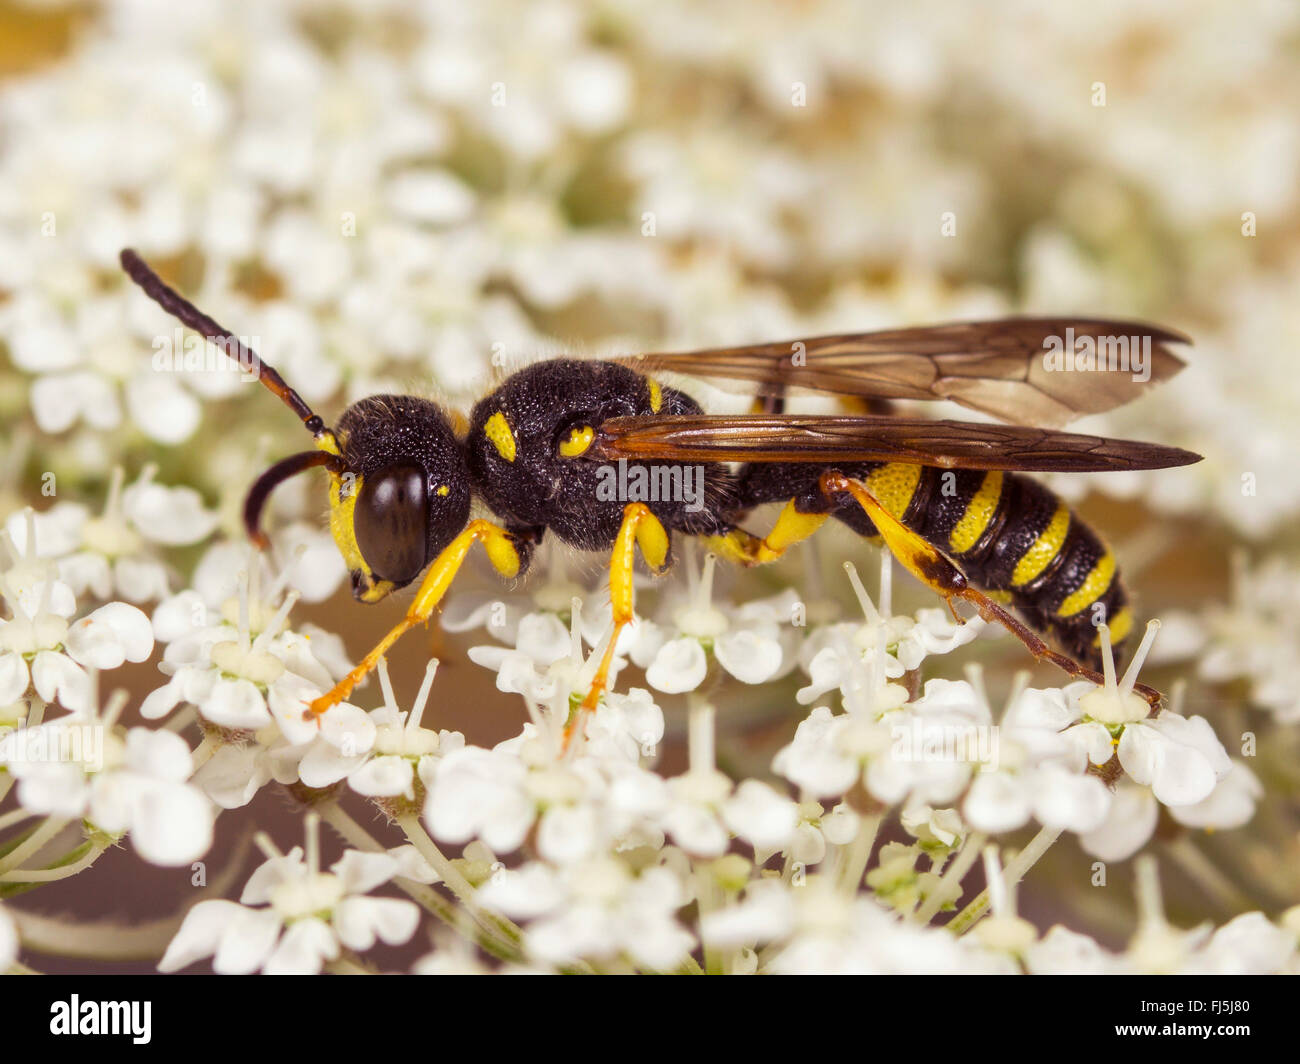 sand-tailed digger wasp (Cerceris arenaria), Male foraging on Wild Carrot (Daucus carota), Germany Stock Photo